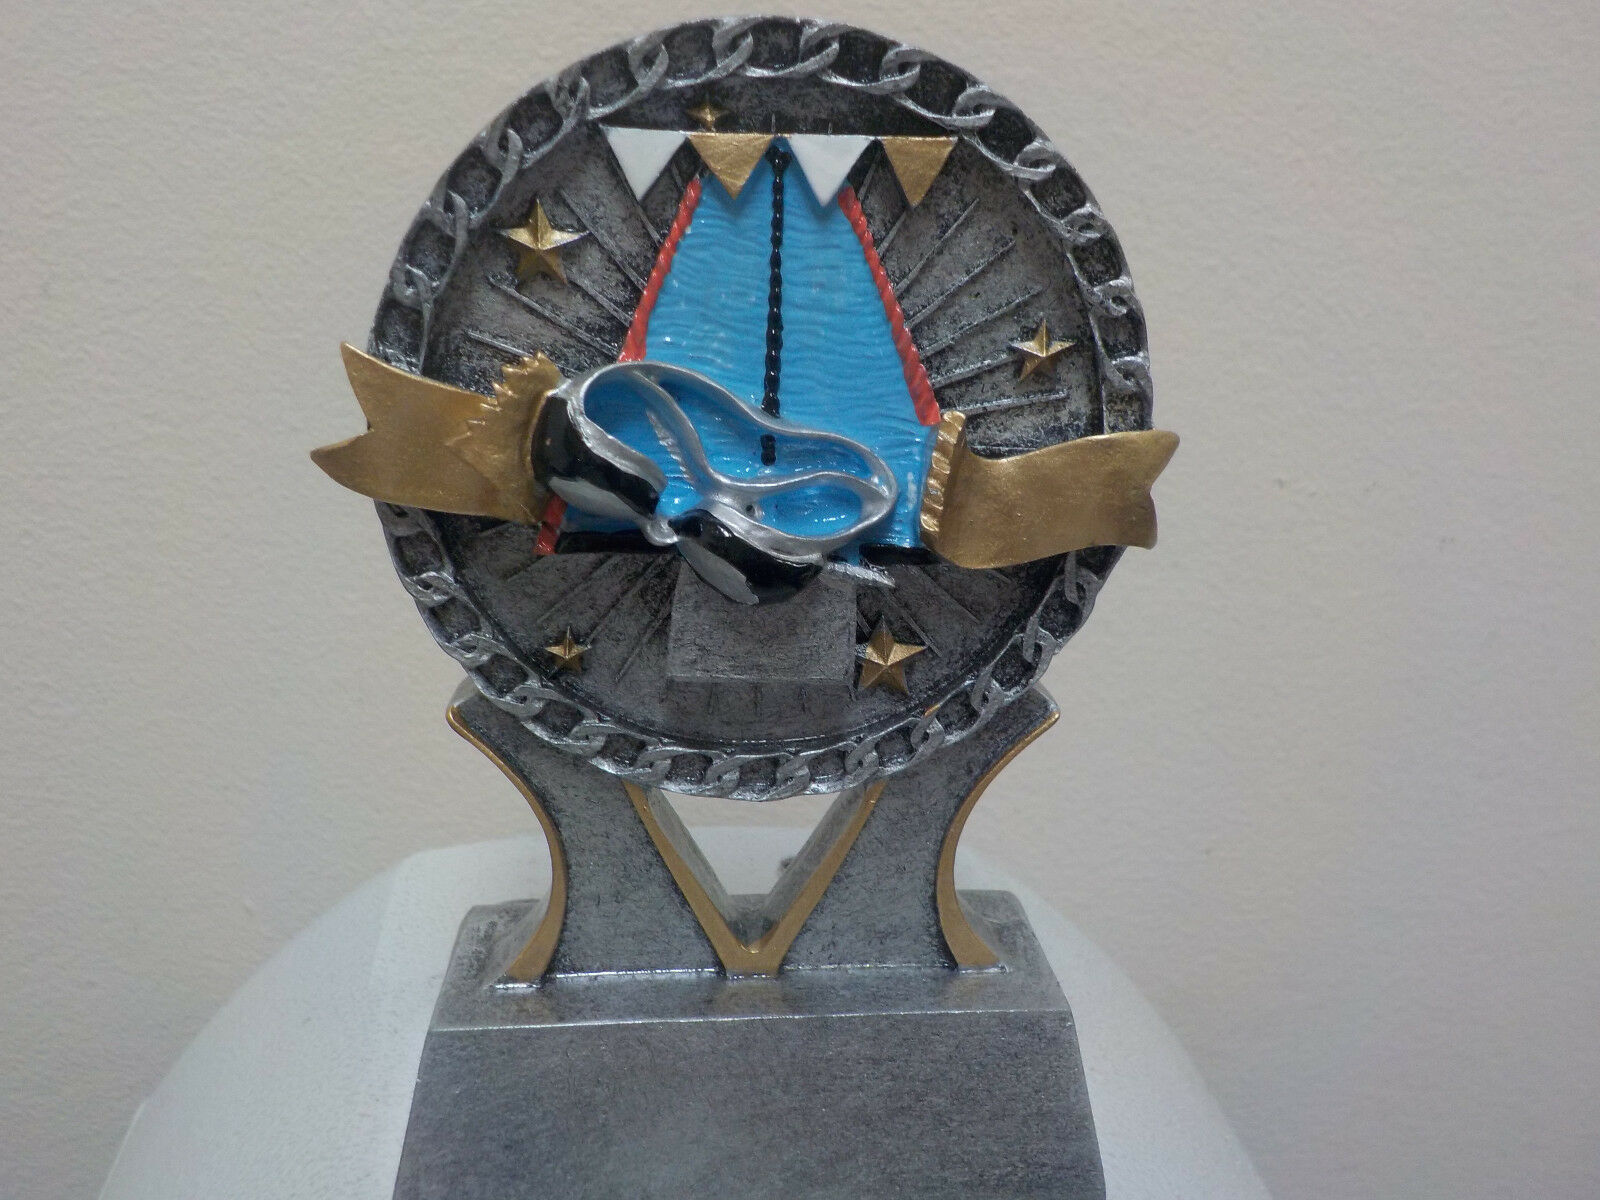 Great Swimming Trophy Award, About 4.5" High, W/ Engraving, Chain Link Border